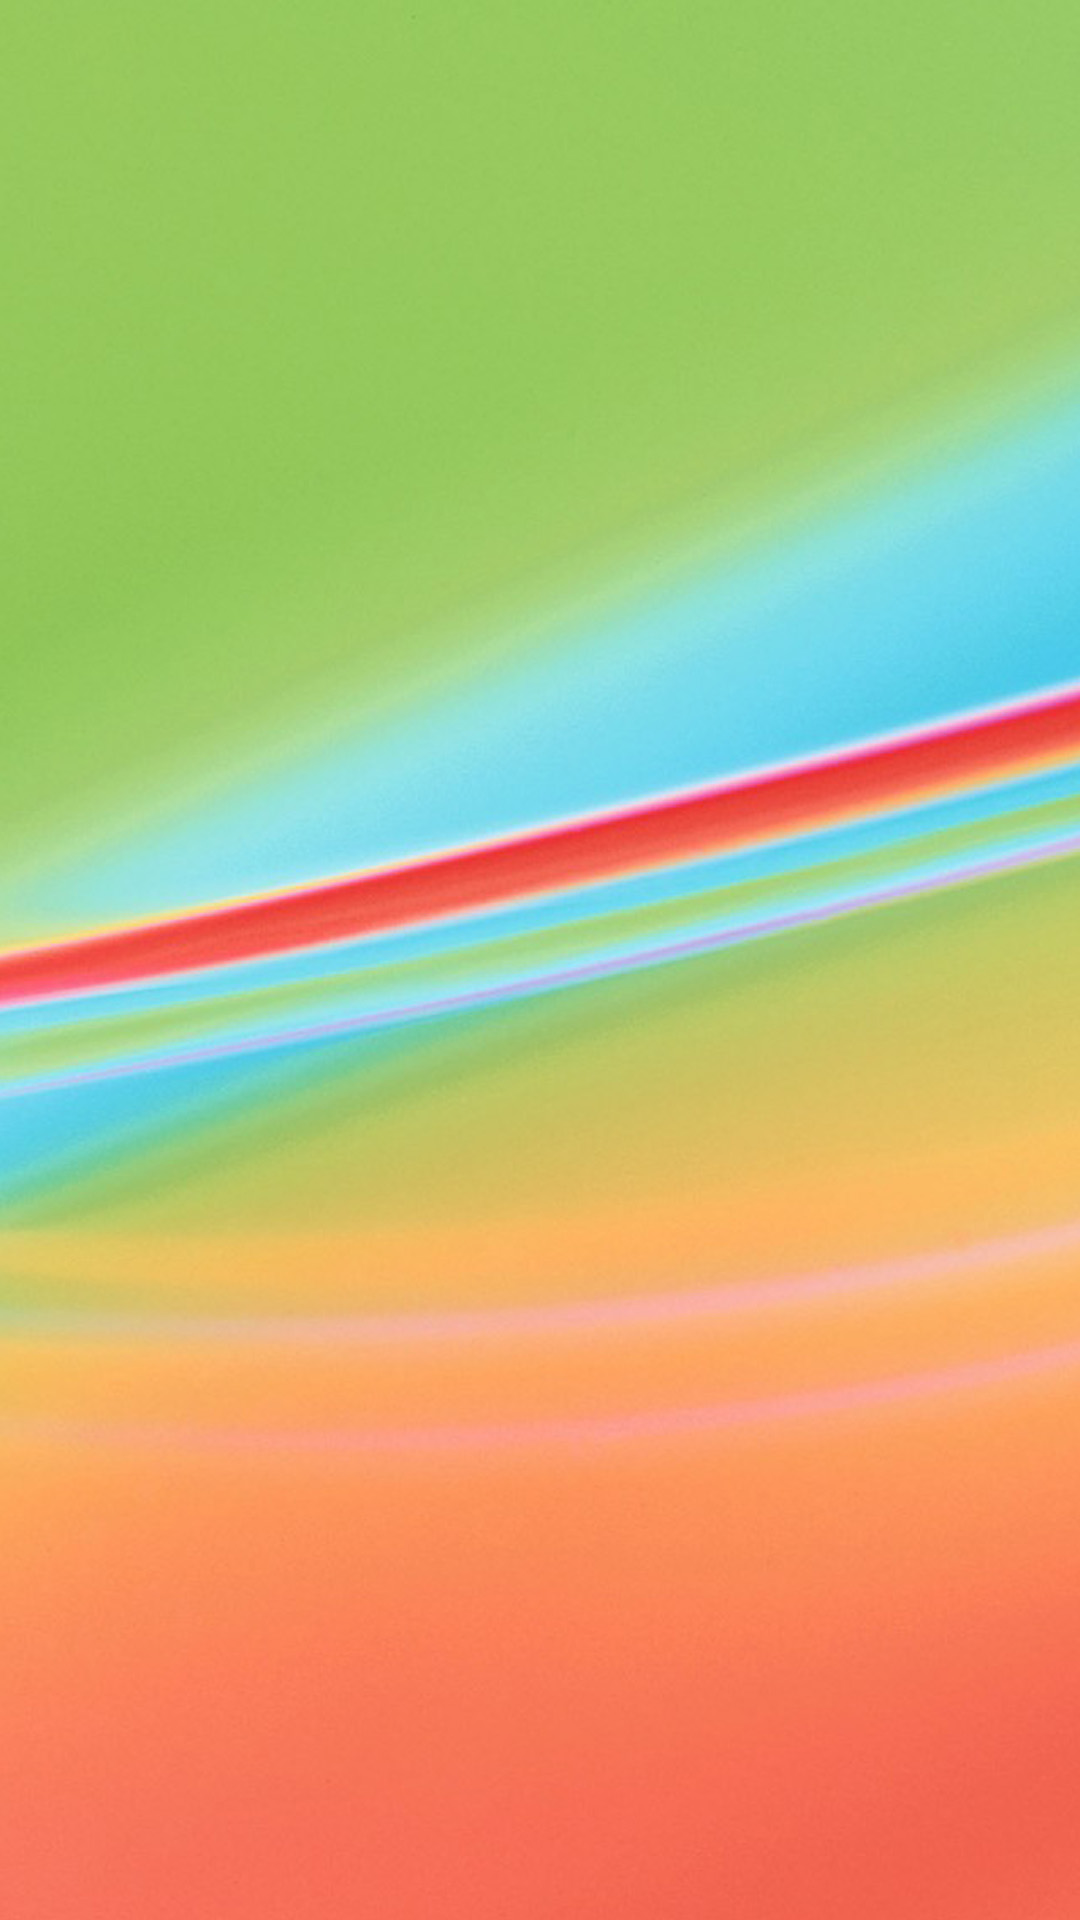 Colorful 330 Android wallpaper